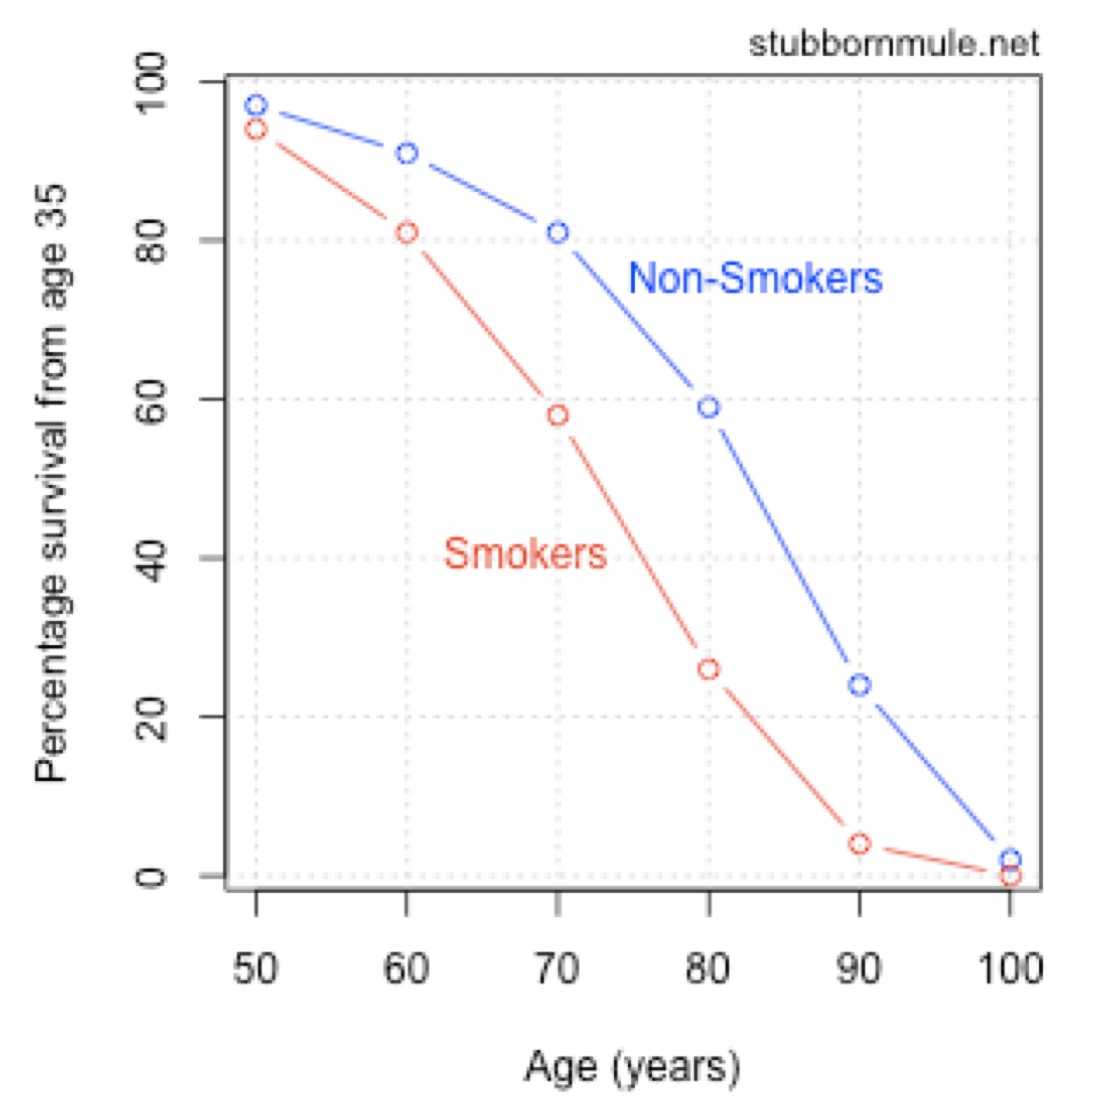 Absolute and relative line graph of smoker and non-smoker life expectancy.